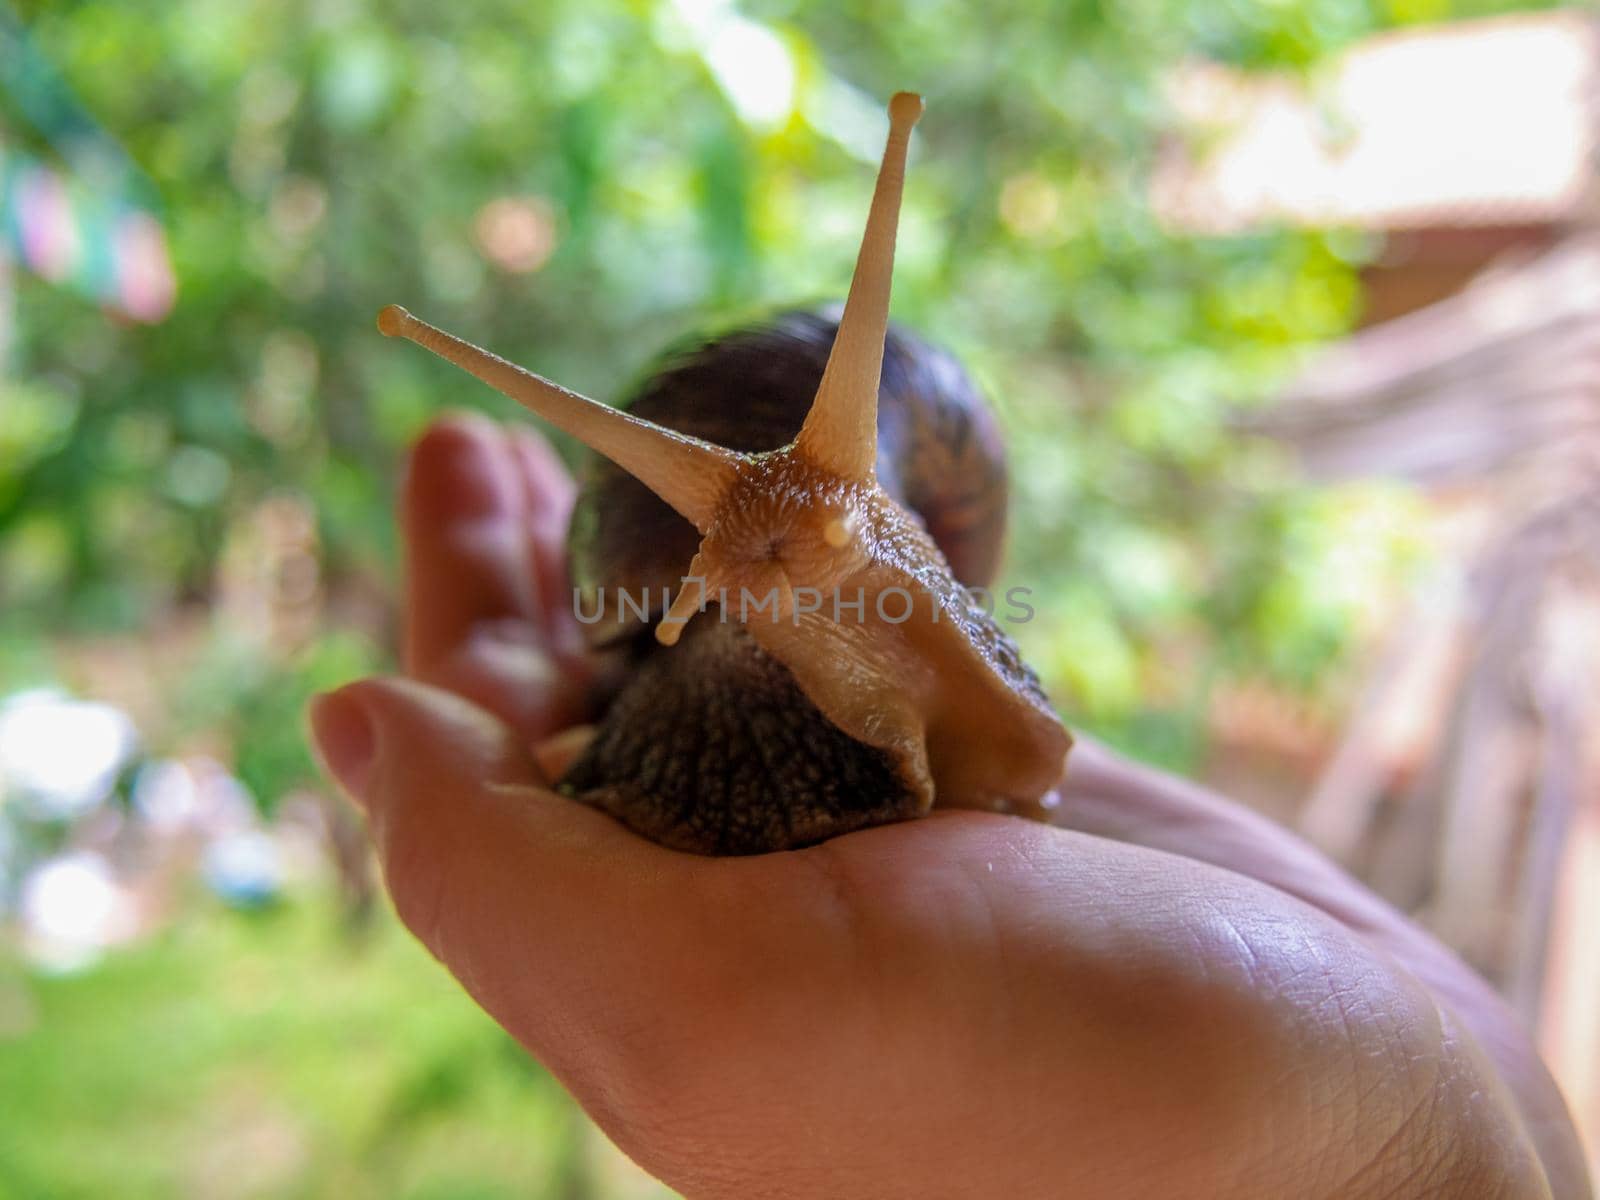 the big Achatina snail in a hand by Andre1ns